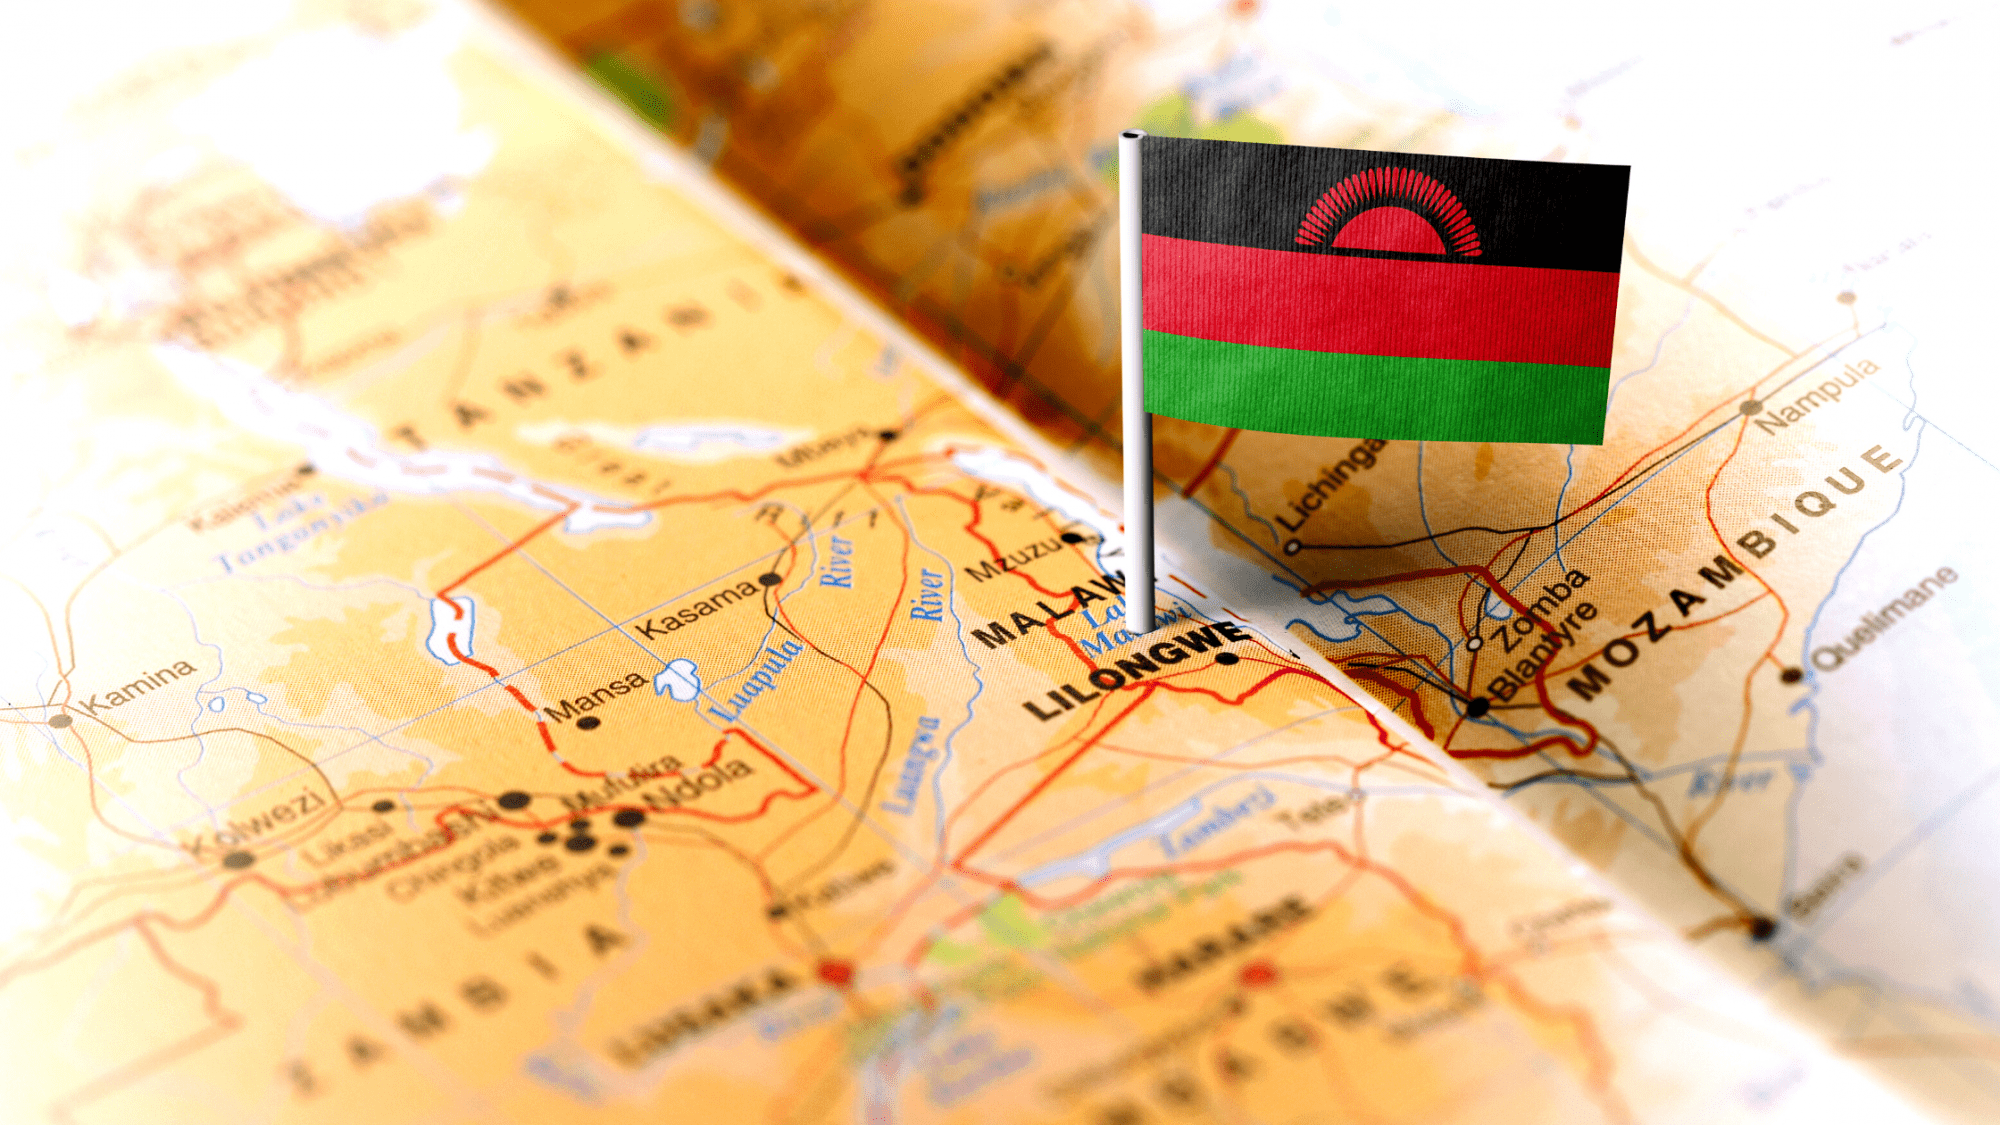 The process of obtaining a Cannabis License in Malawi can be done so at the Cannabis Regulatory Authority.